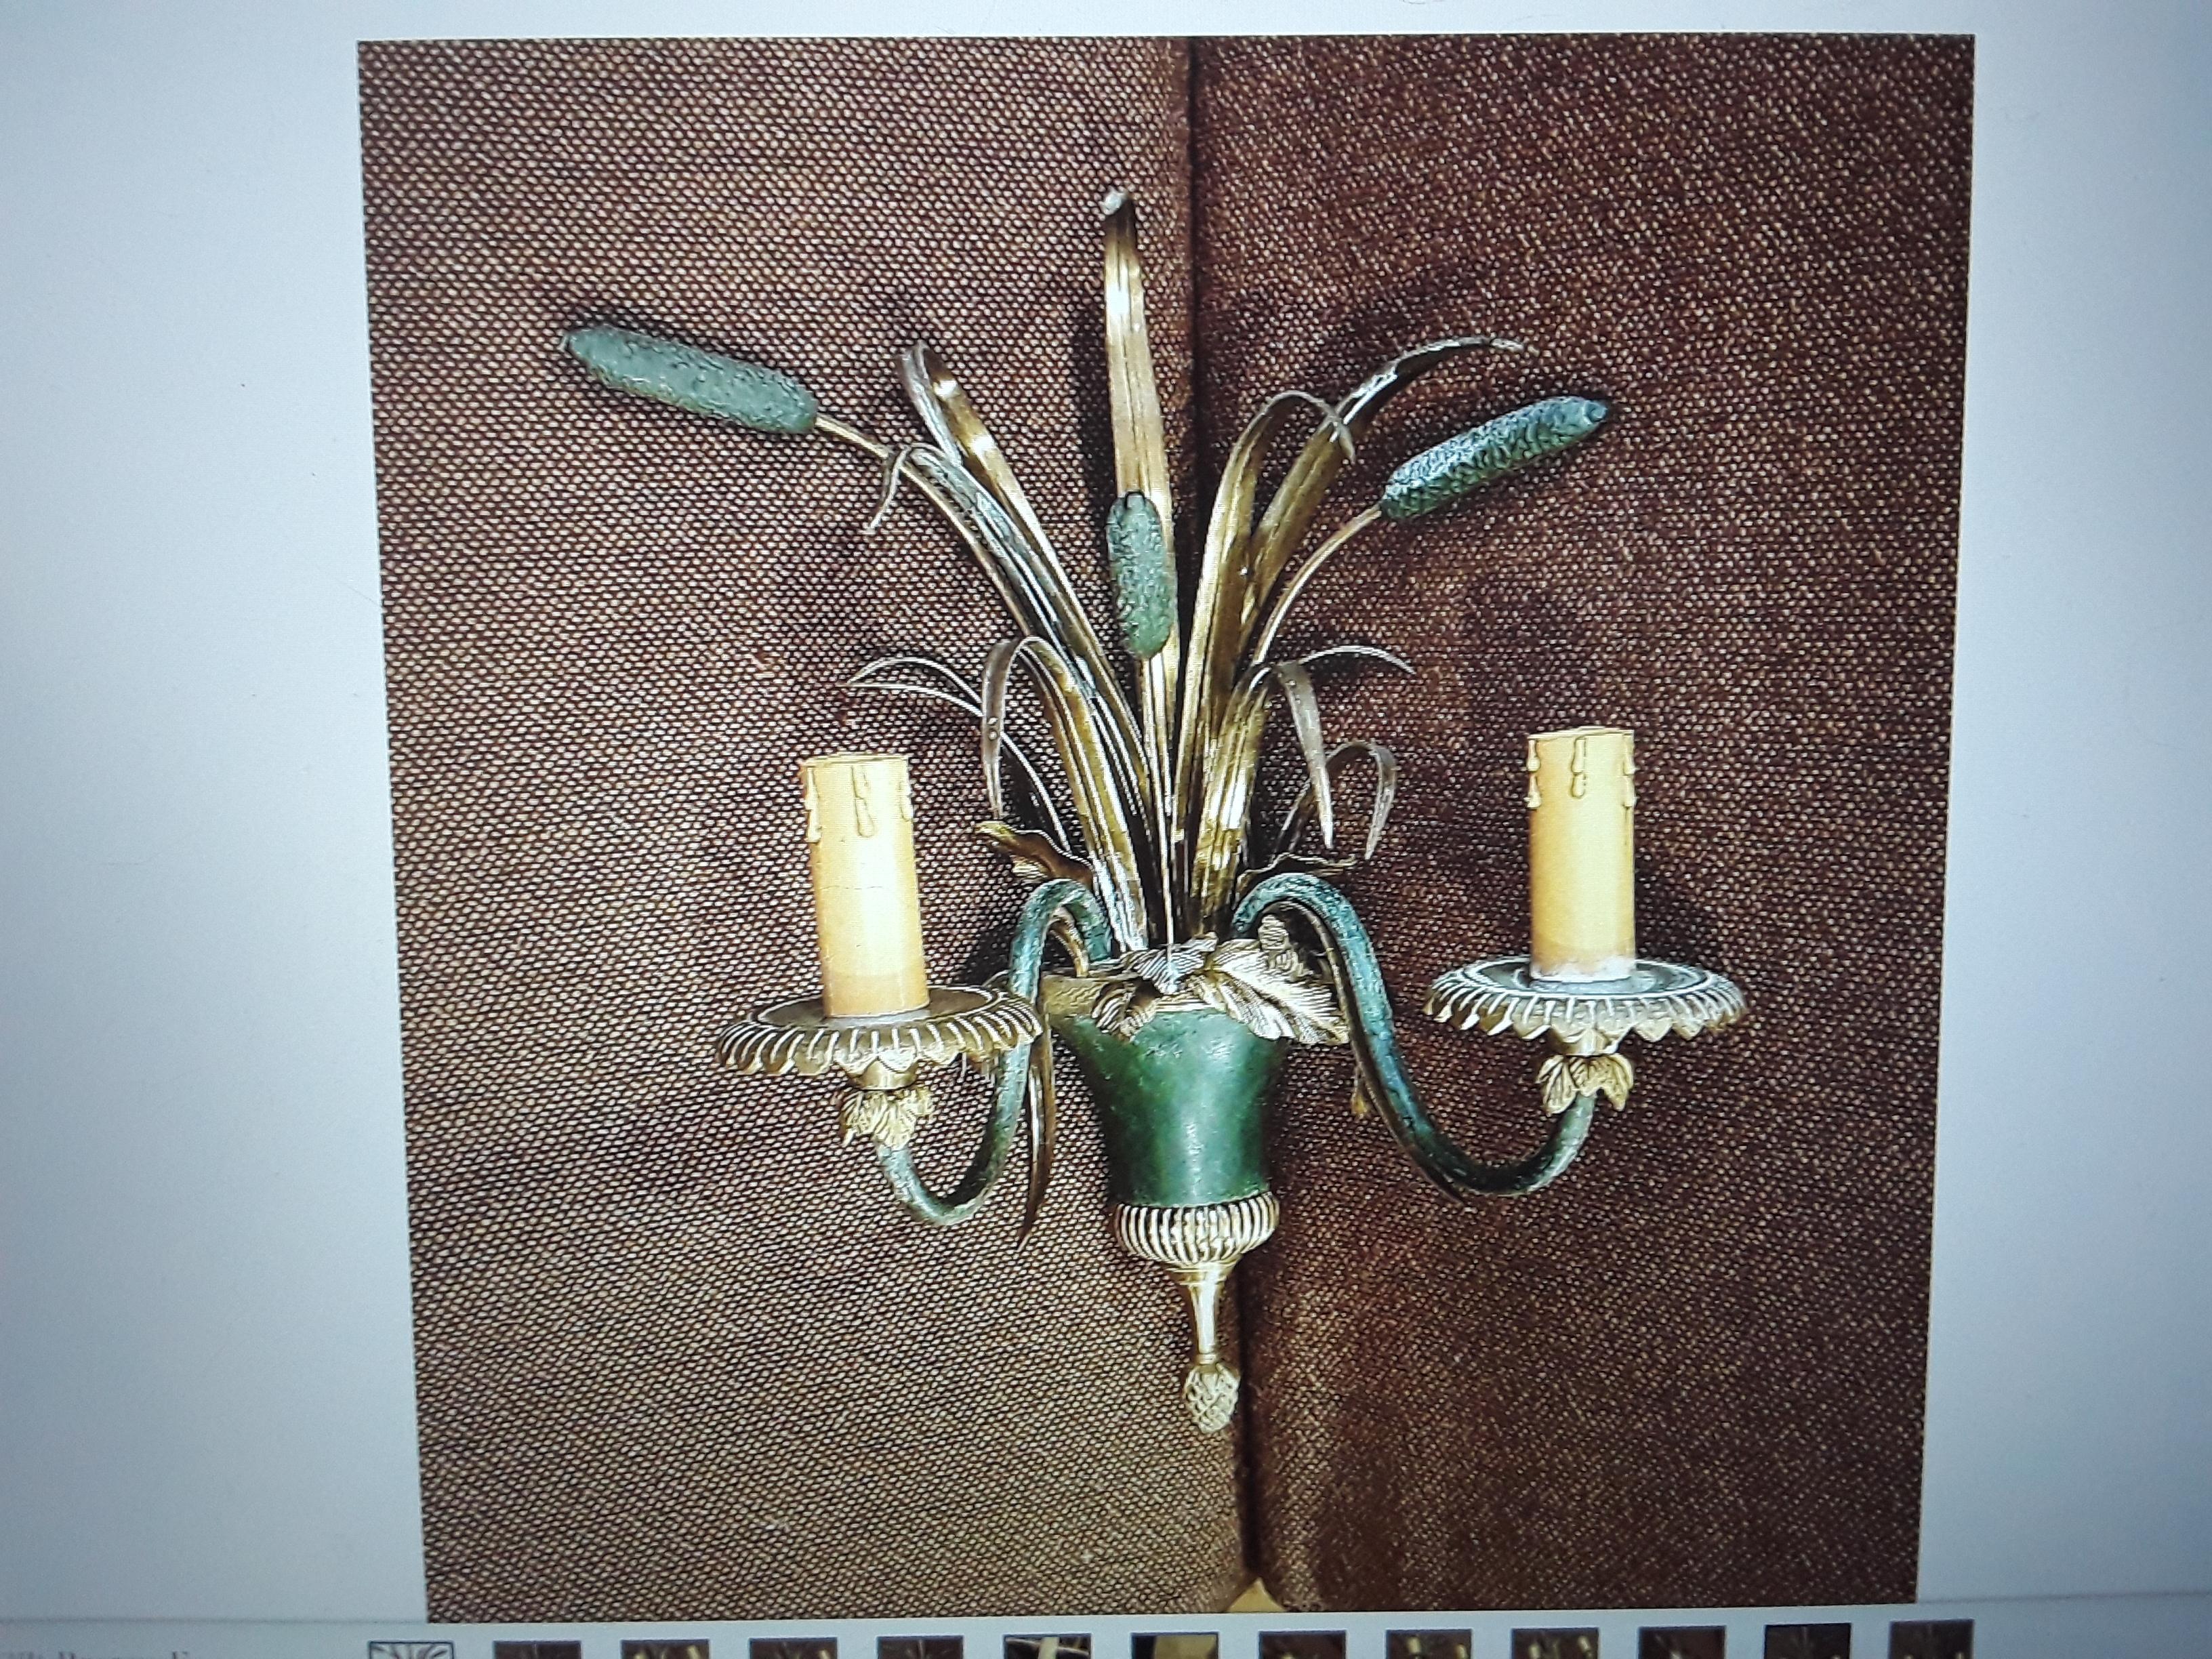 1940s French Regency Gilt &Patinated Bronze Floral Wall Sconce by Maison Charles In Good Condition For Sale In Opa Locka, FL